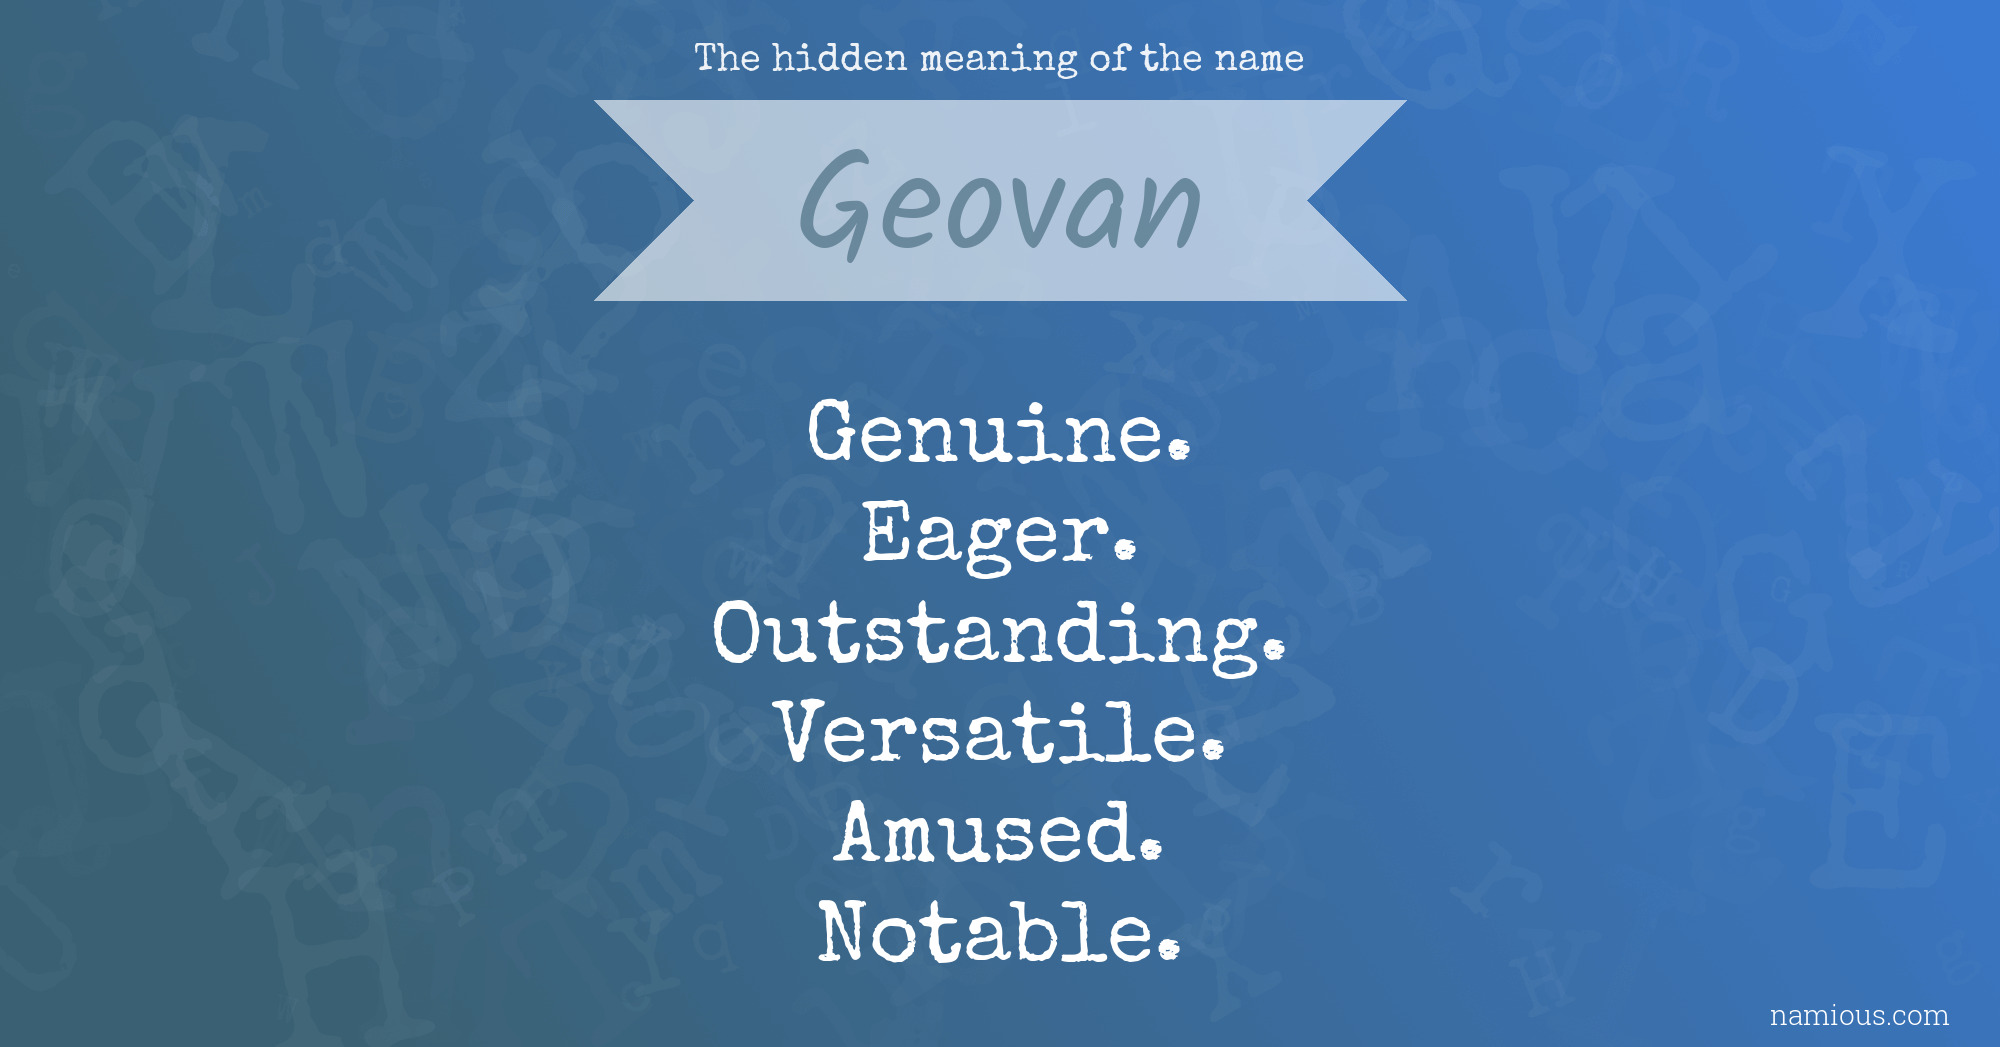 The hidden meaning of the name Geovan